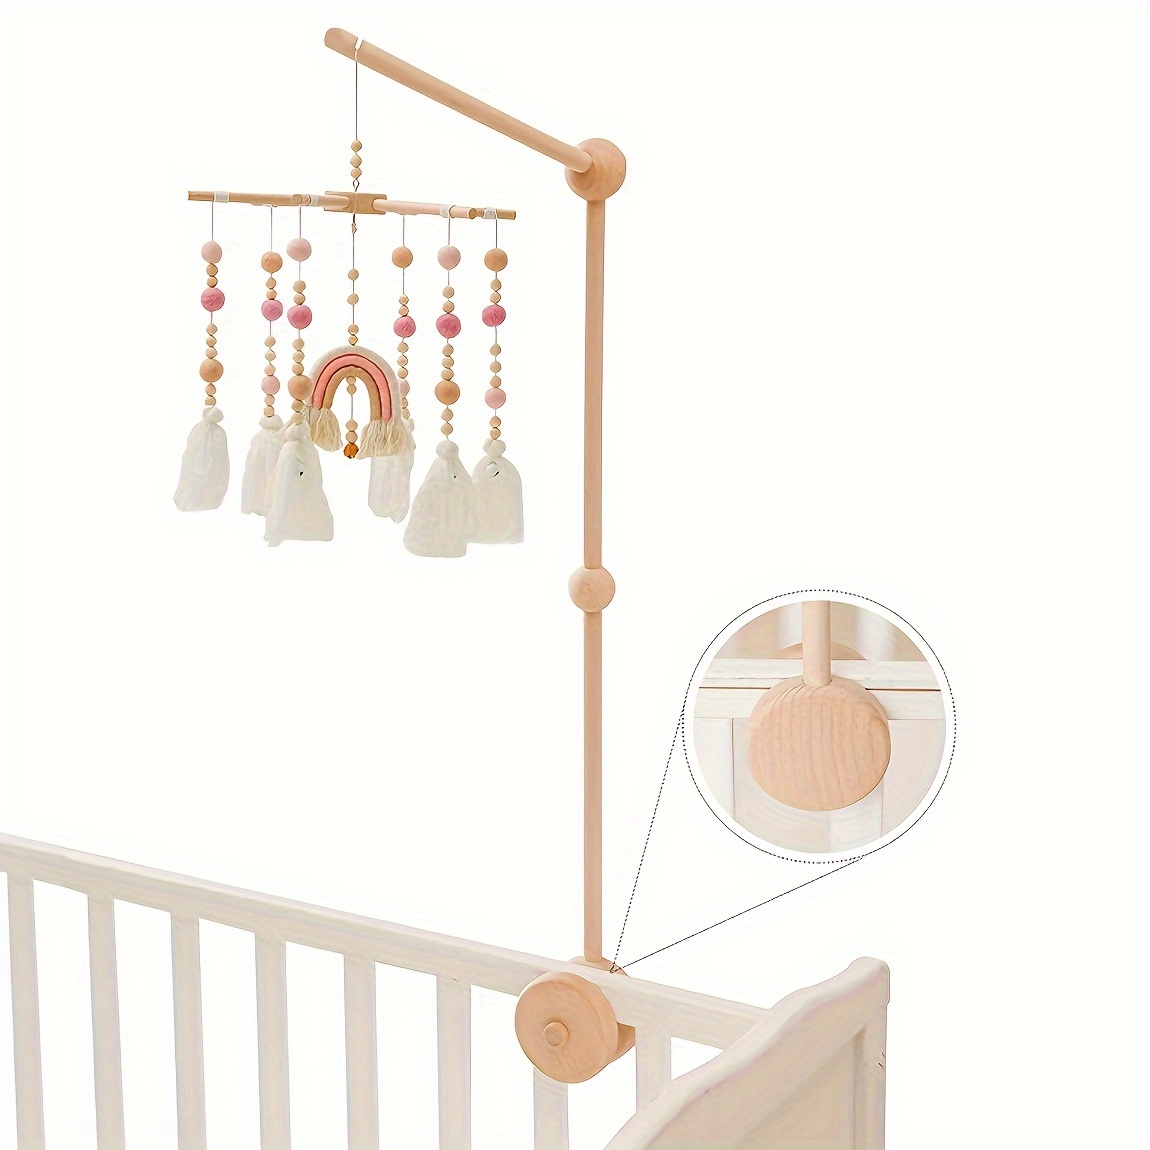  Baby Crib Mobile Arm - HBM 30 Inch Wooden Mobile Arm